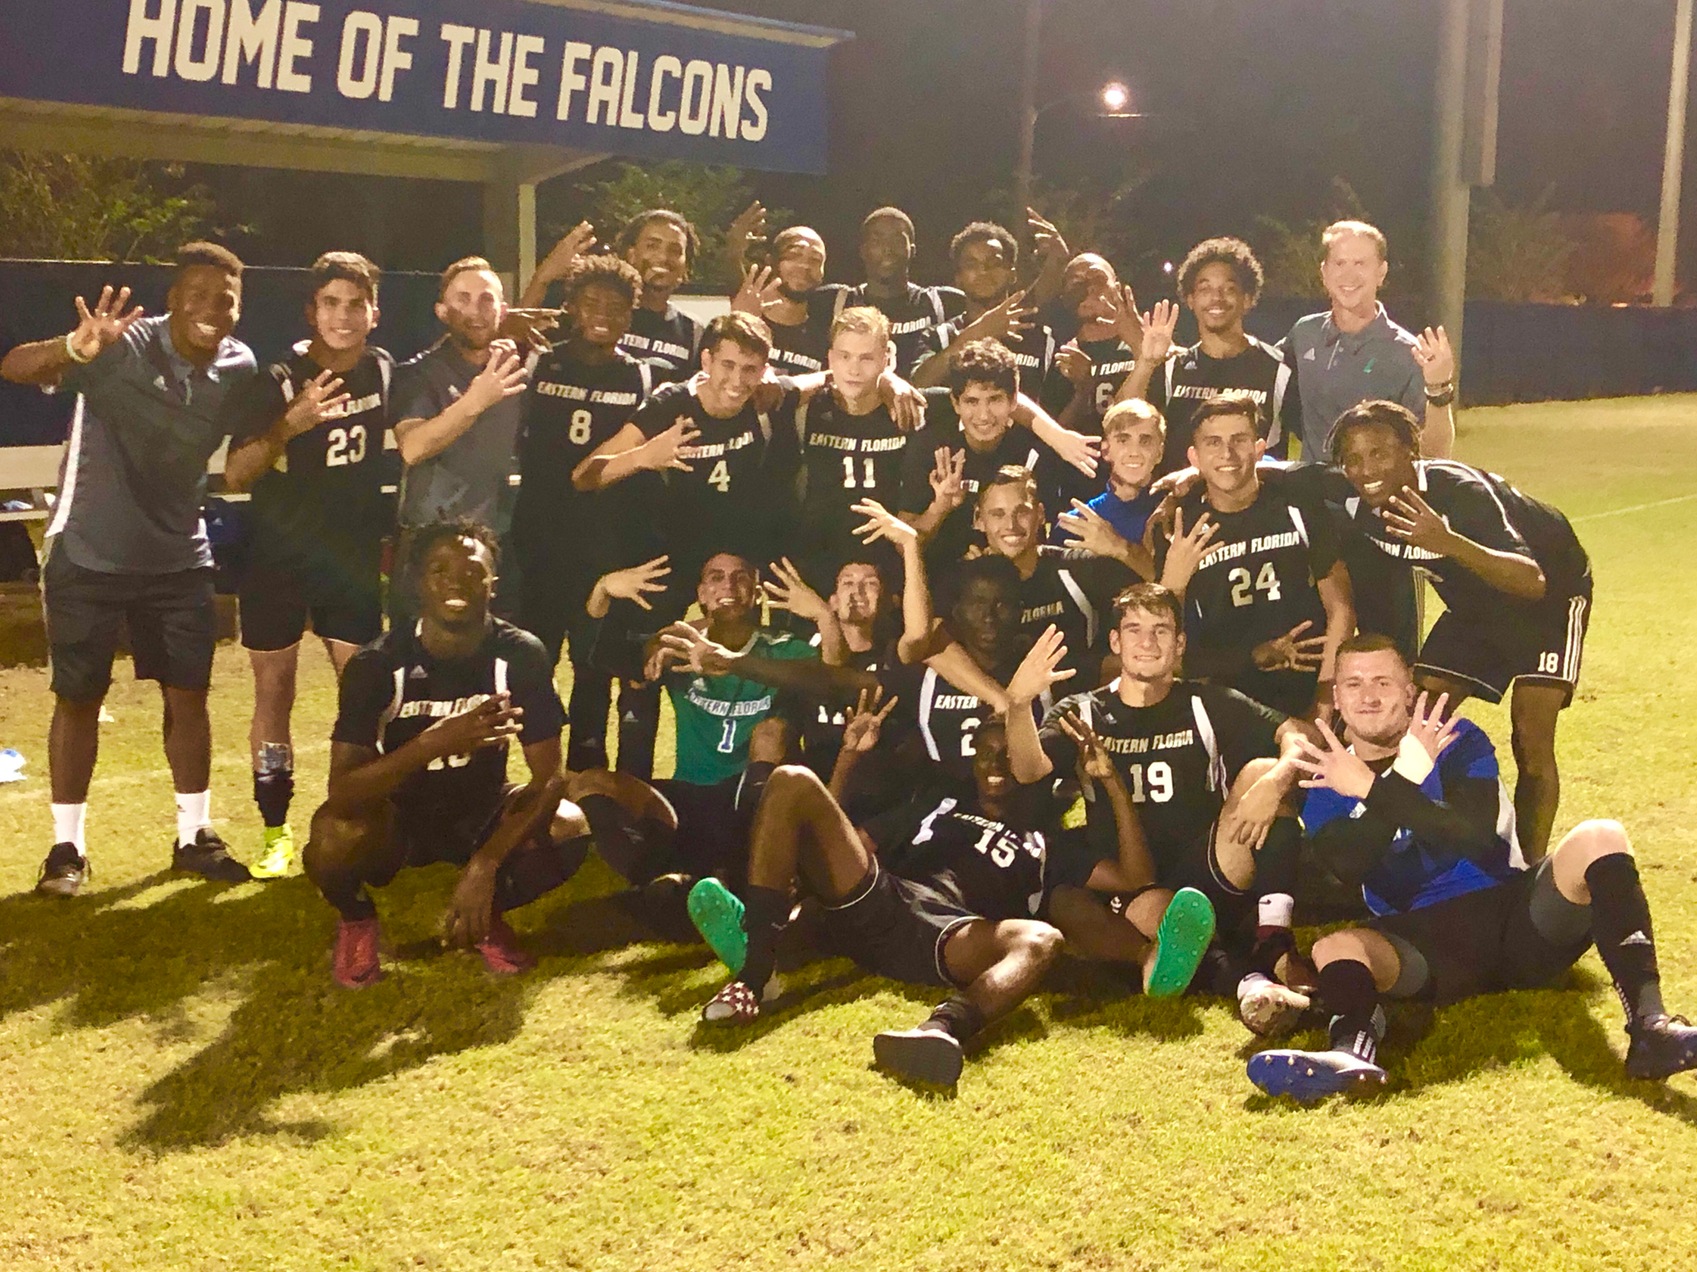 Men's soccer team wins in penalty kicks, advances to national tournament semifinals